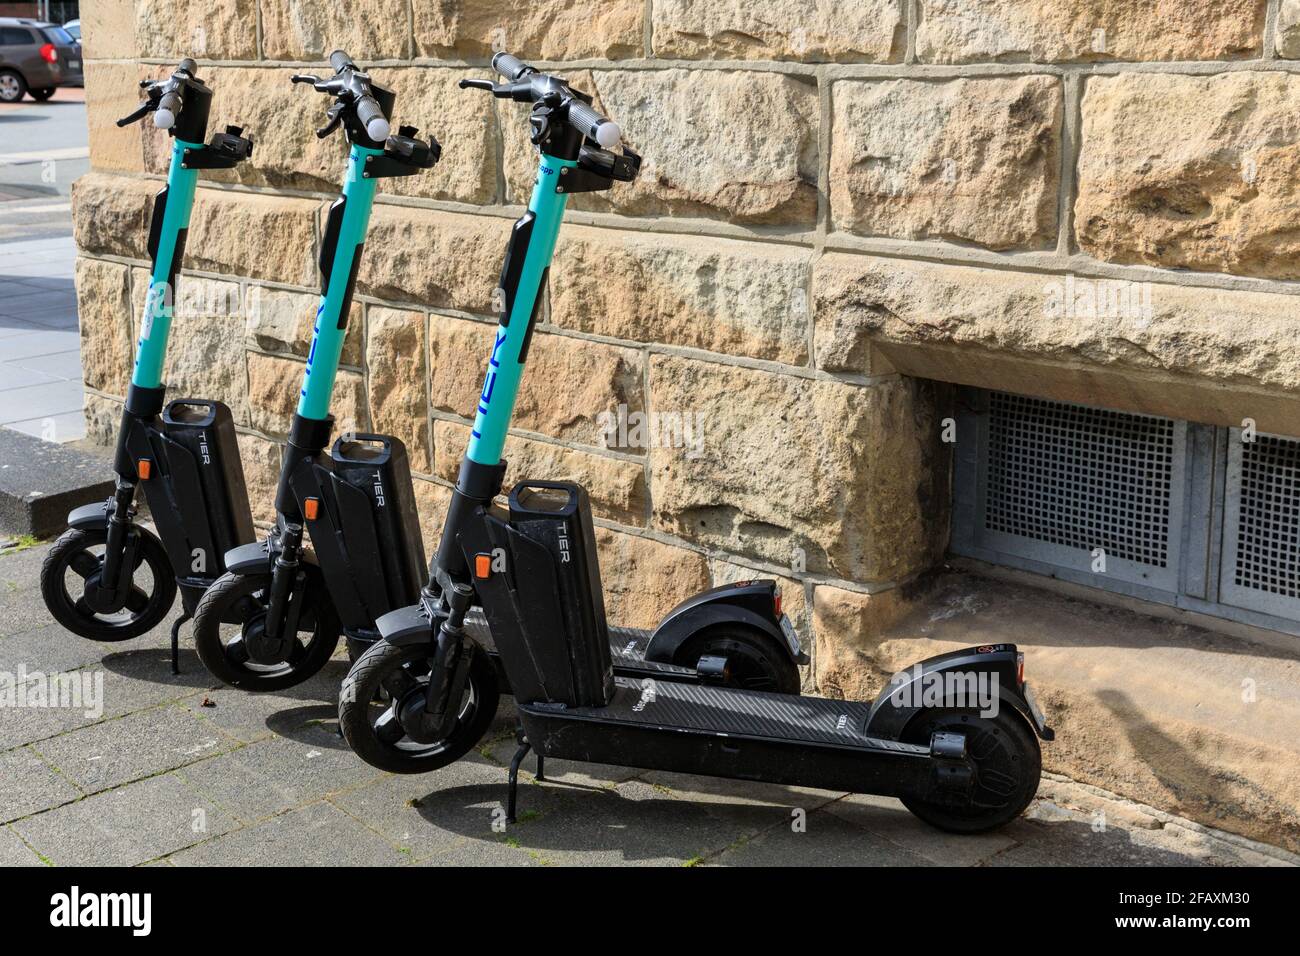 Tier Electric Scooter High Resolution Stock Photography and Images - Alamy